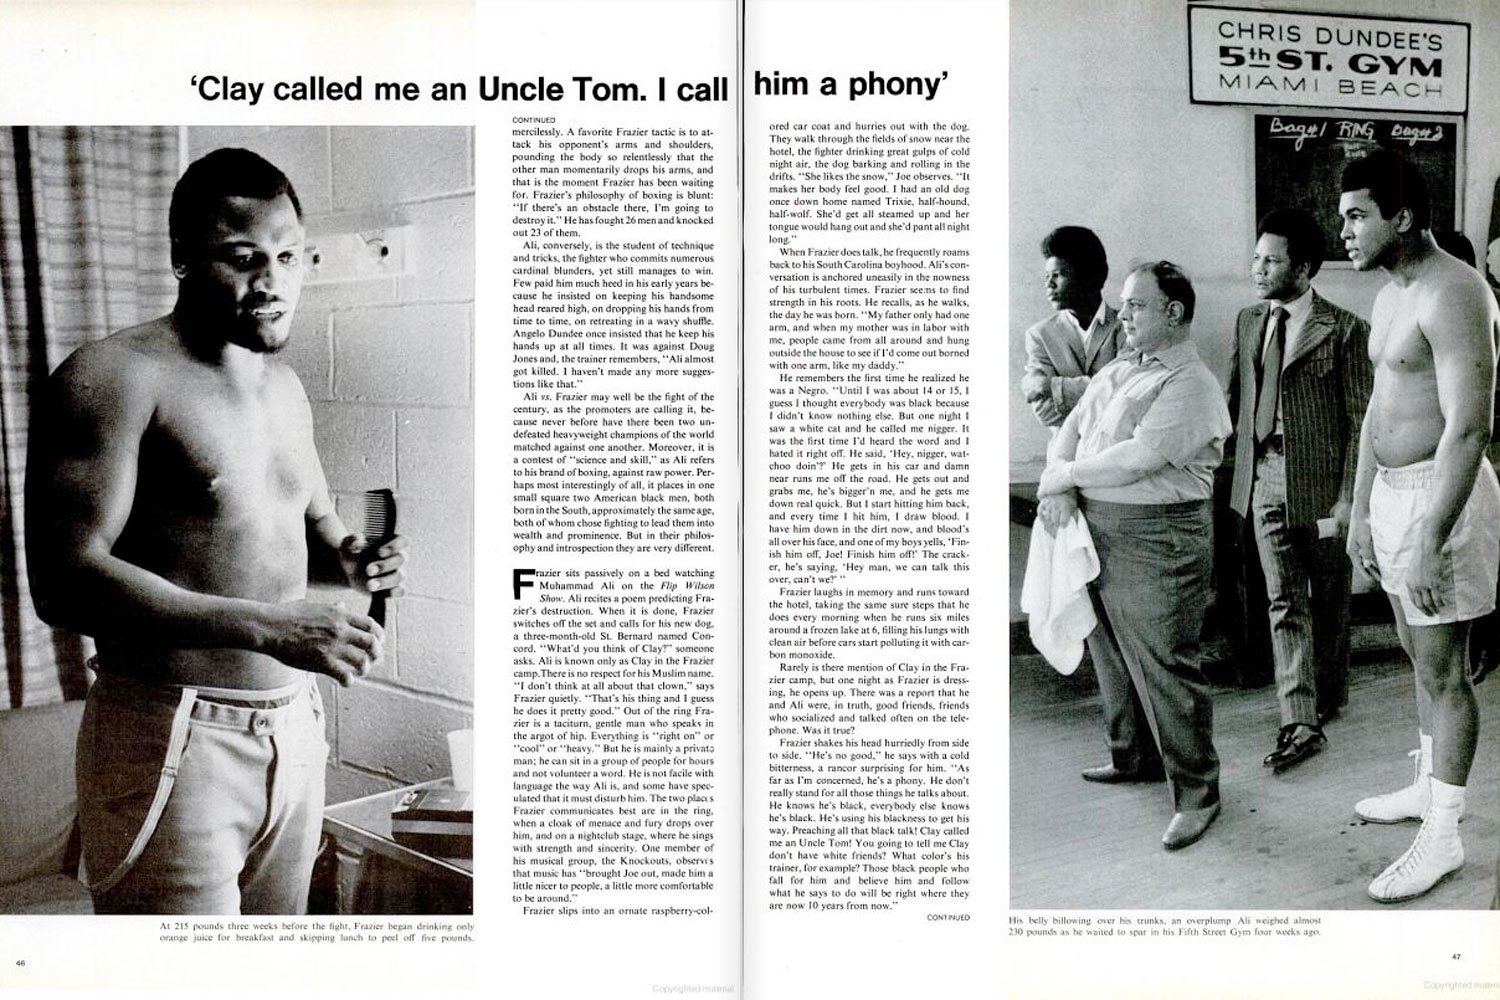 LIFE magazine, March 5, 1971. Best viewed in "full screen" mode; see button at right.